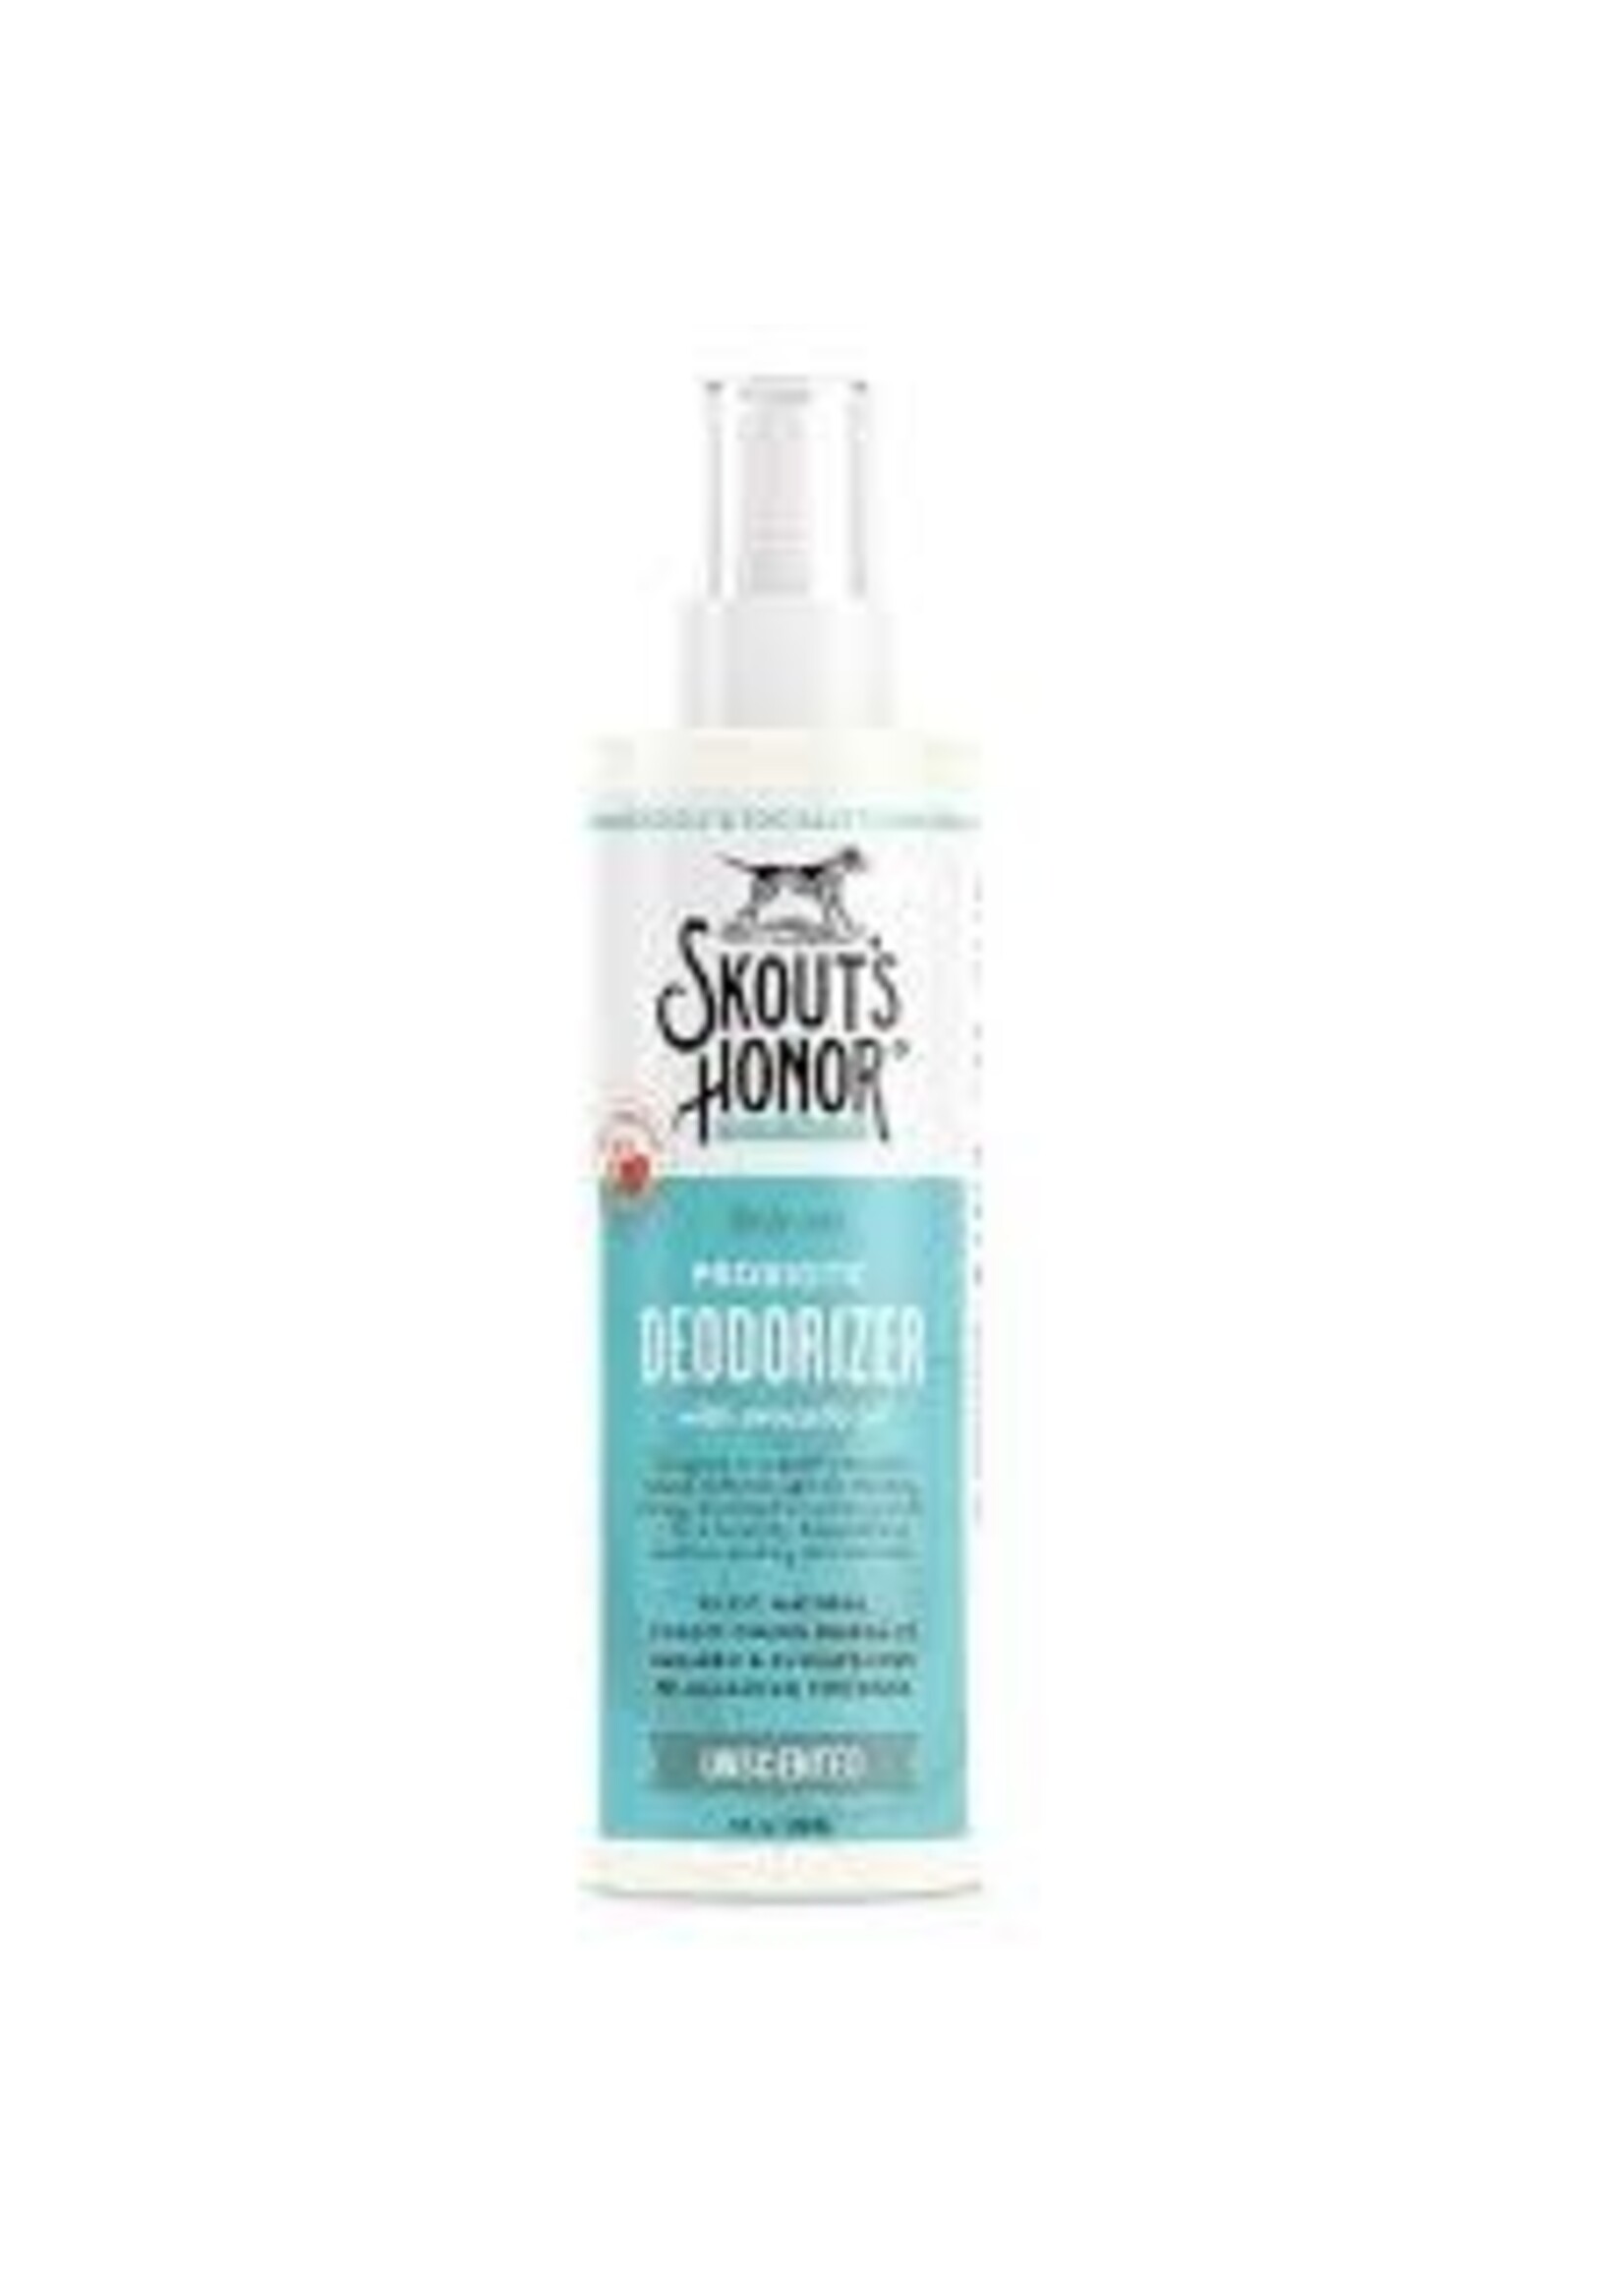 Skout's Honor Skout's Honor Deodorize Spray Unscented 8oz